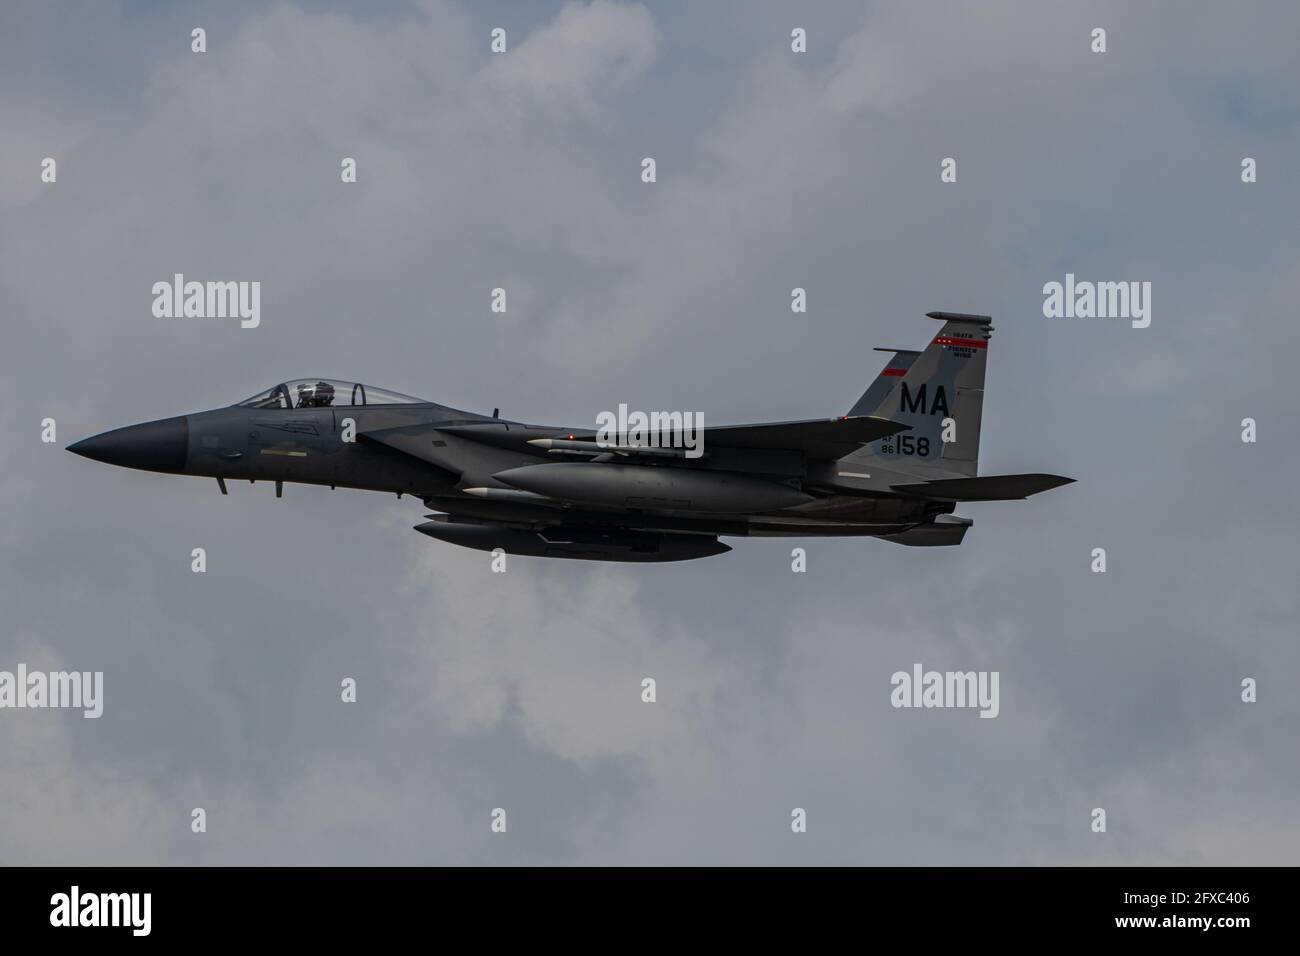 Montreal, Quebec, Canada - 05 26 2021: NORAD exercise in Montreal. The USAF and RCAF practice together in the Montreal city area. An F15 Eagle. Stock Photo